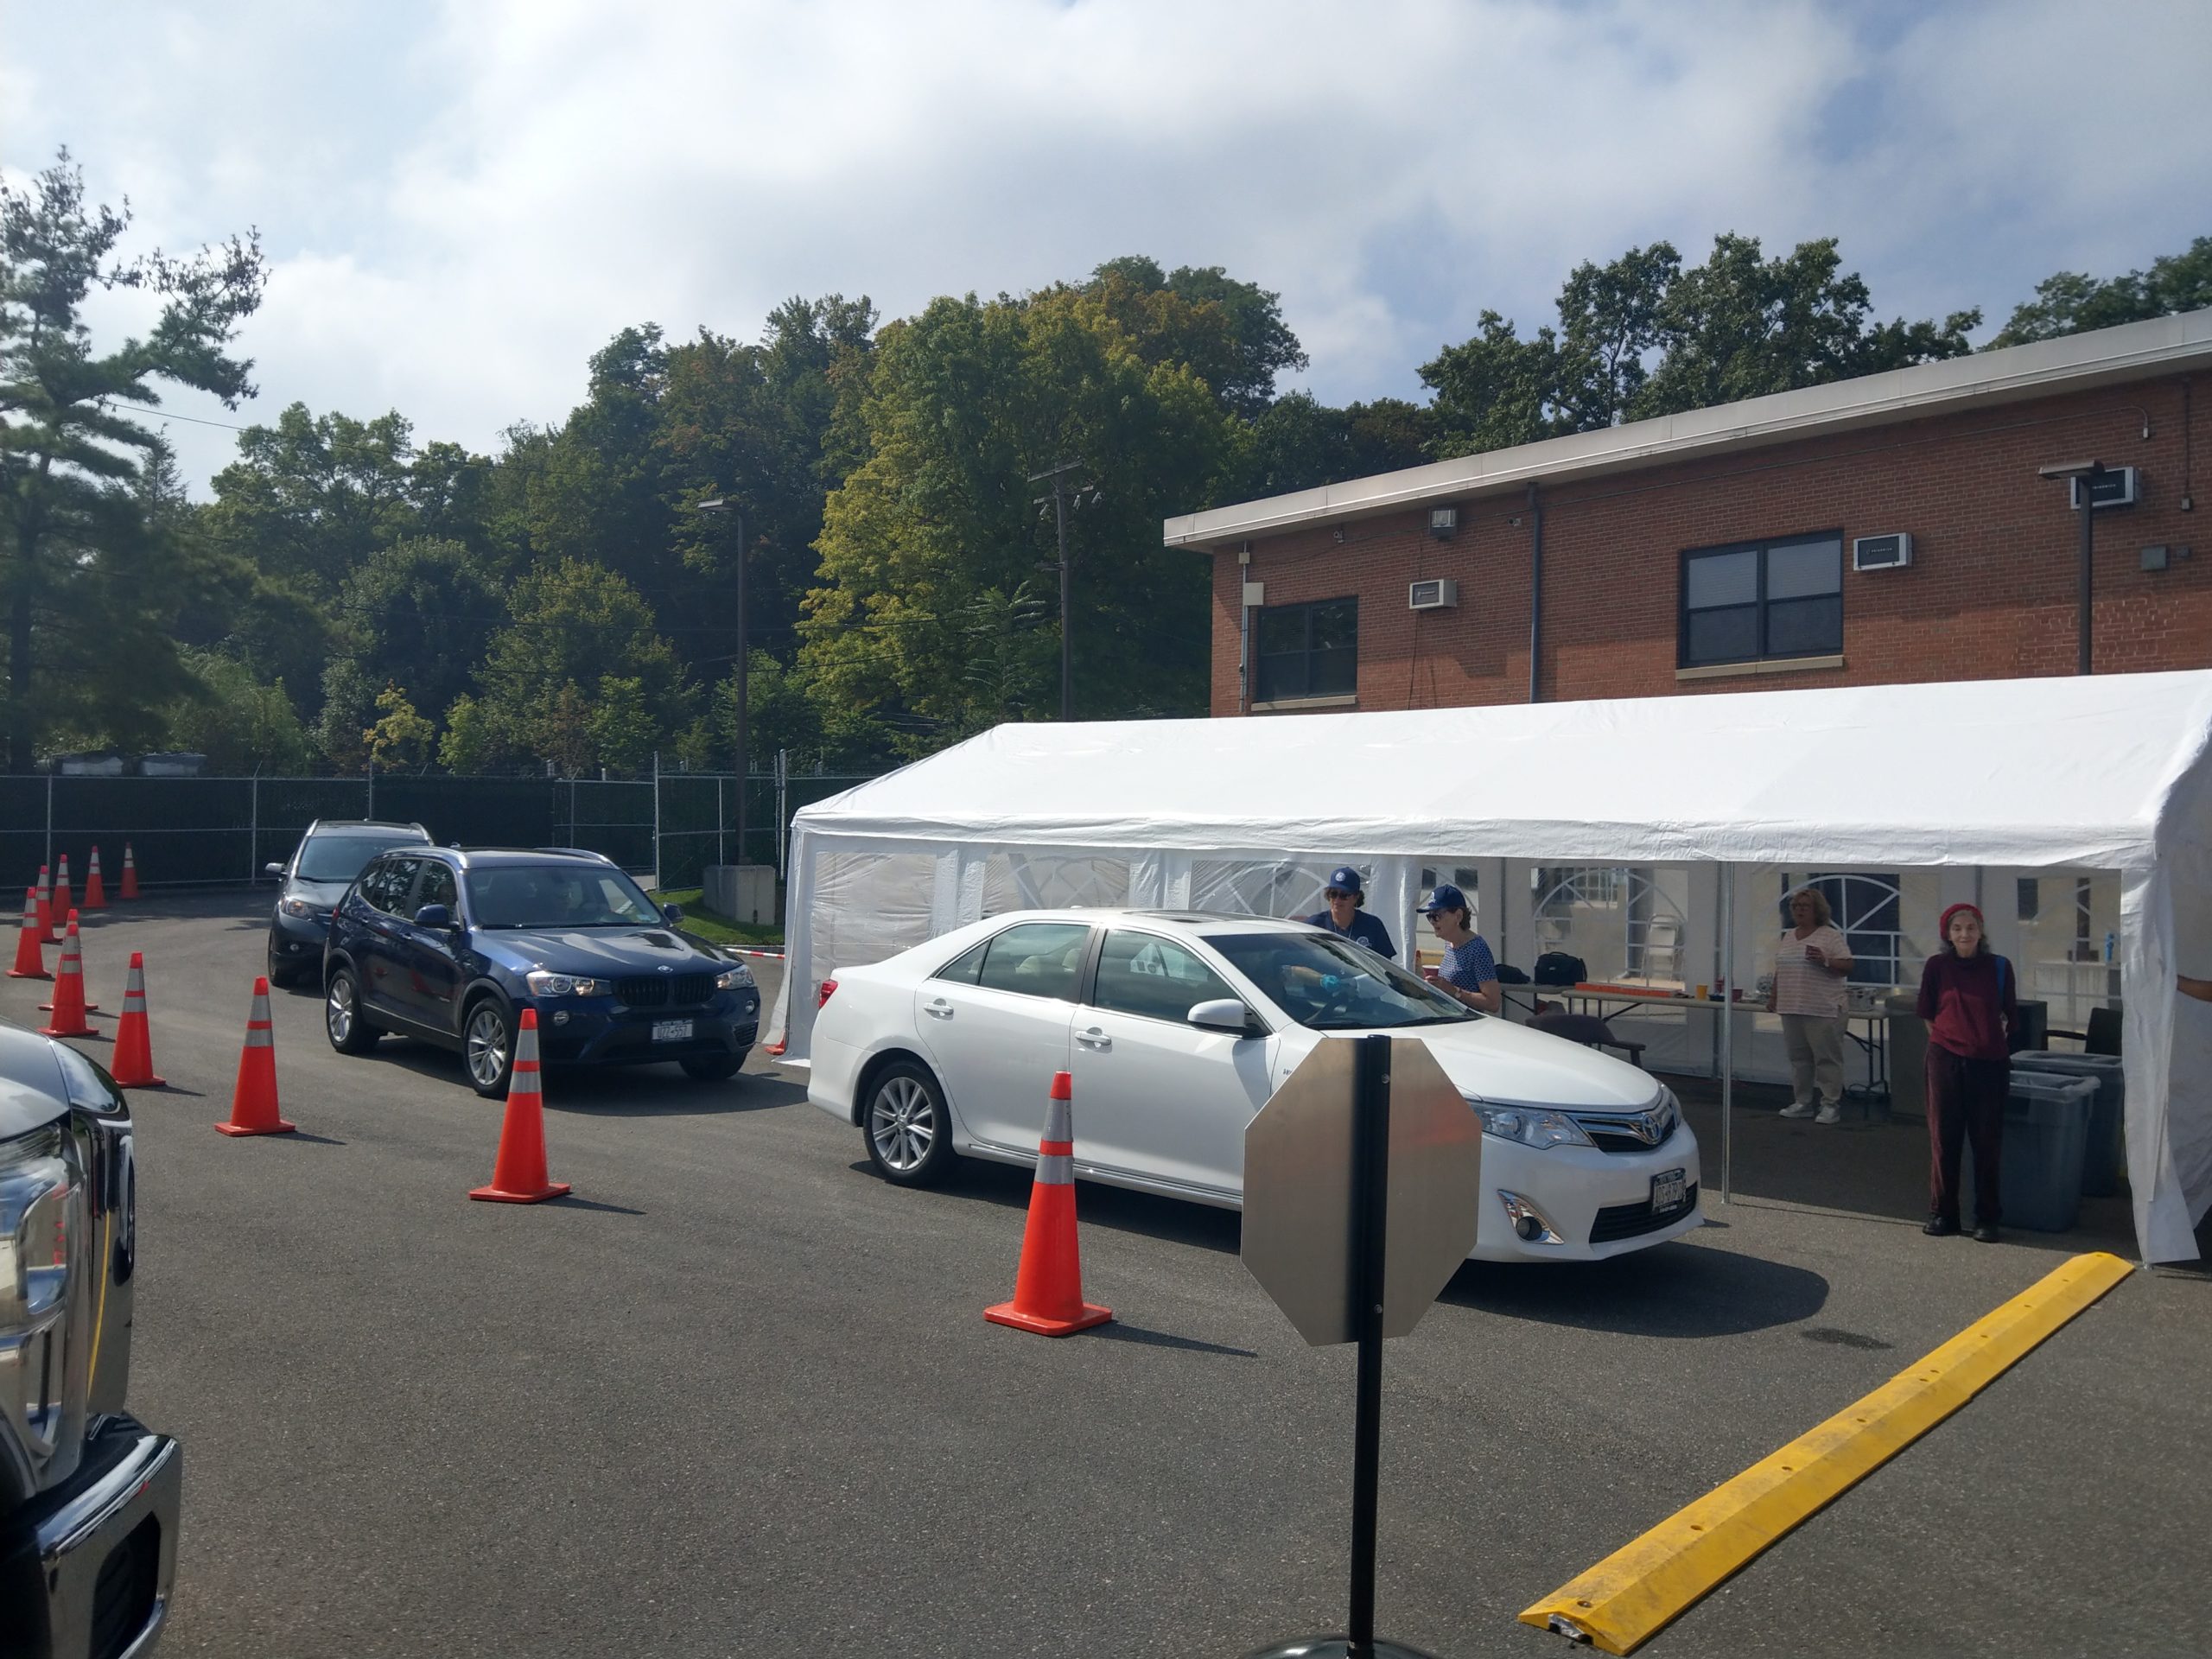 Local residents utilize the Great Neck Water Pollution Control District’s free medical disposal drive-thru back in September. The District is set to host its second Shed the Meds event on Sunday, June 3. (Photo courtesy of the Great Neck Water Pollution Control District)